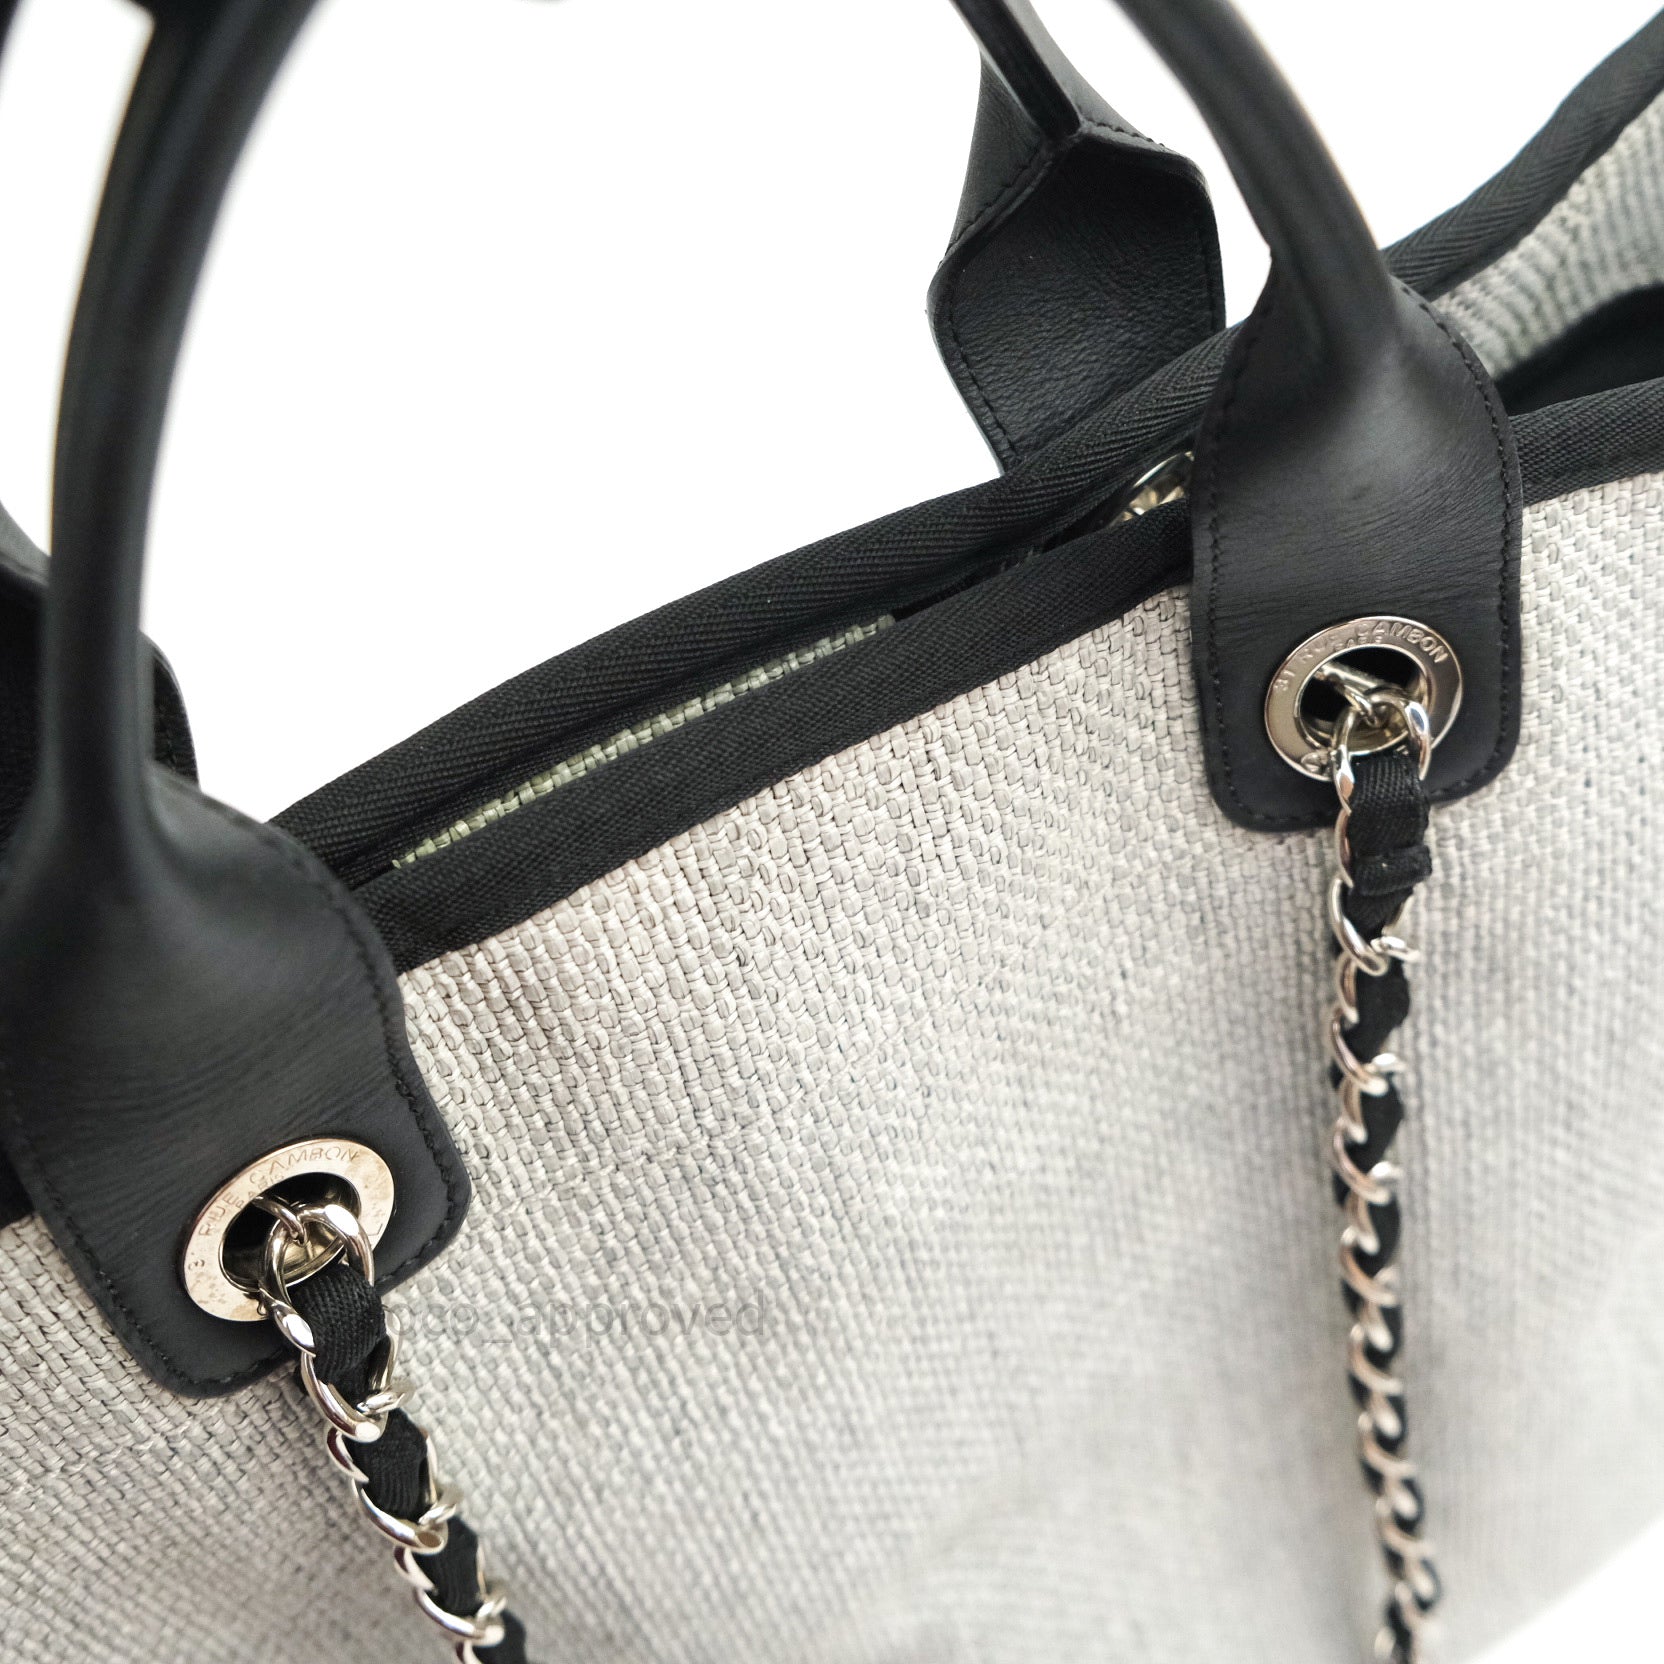 Buy Chanel Deauville Chain Tote Canvas Large Gray 1156101